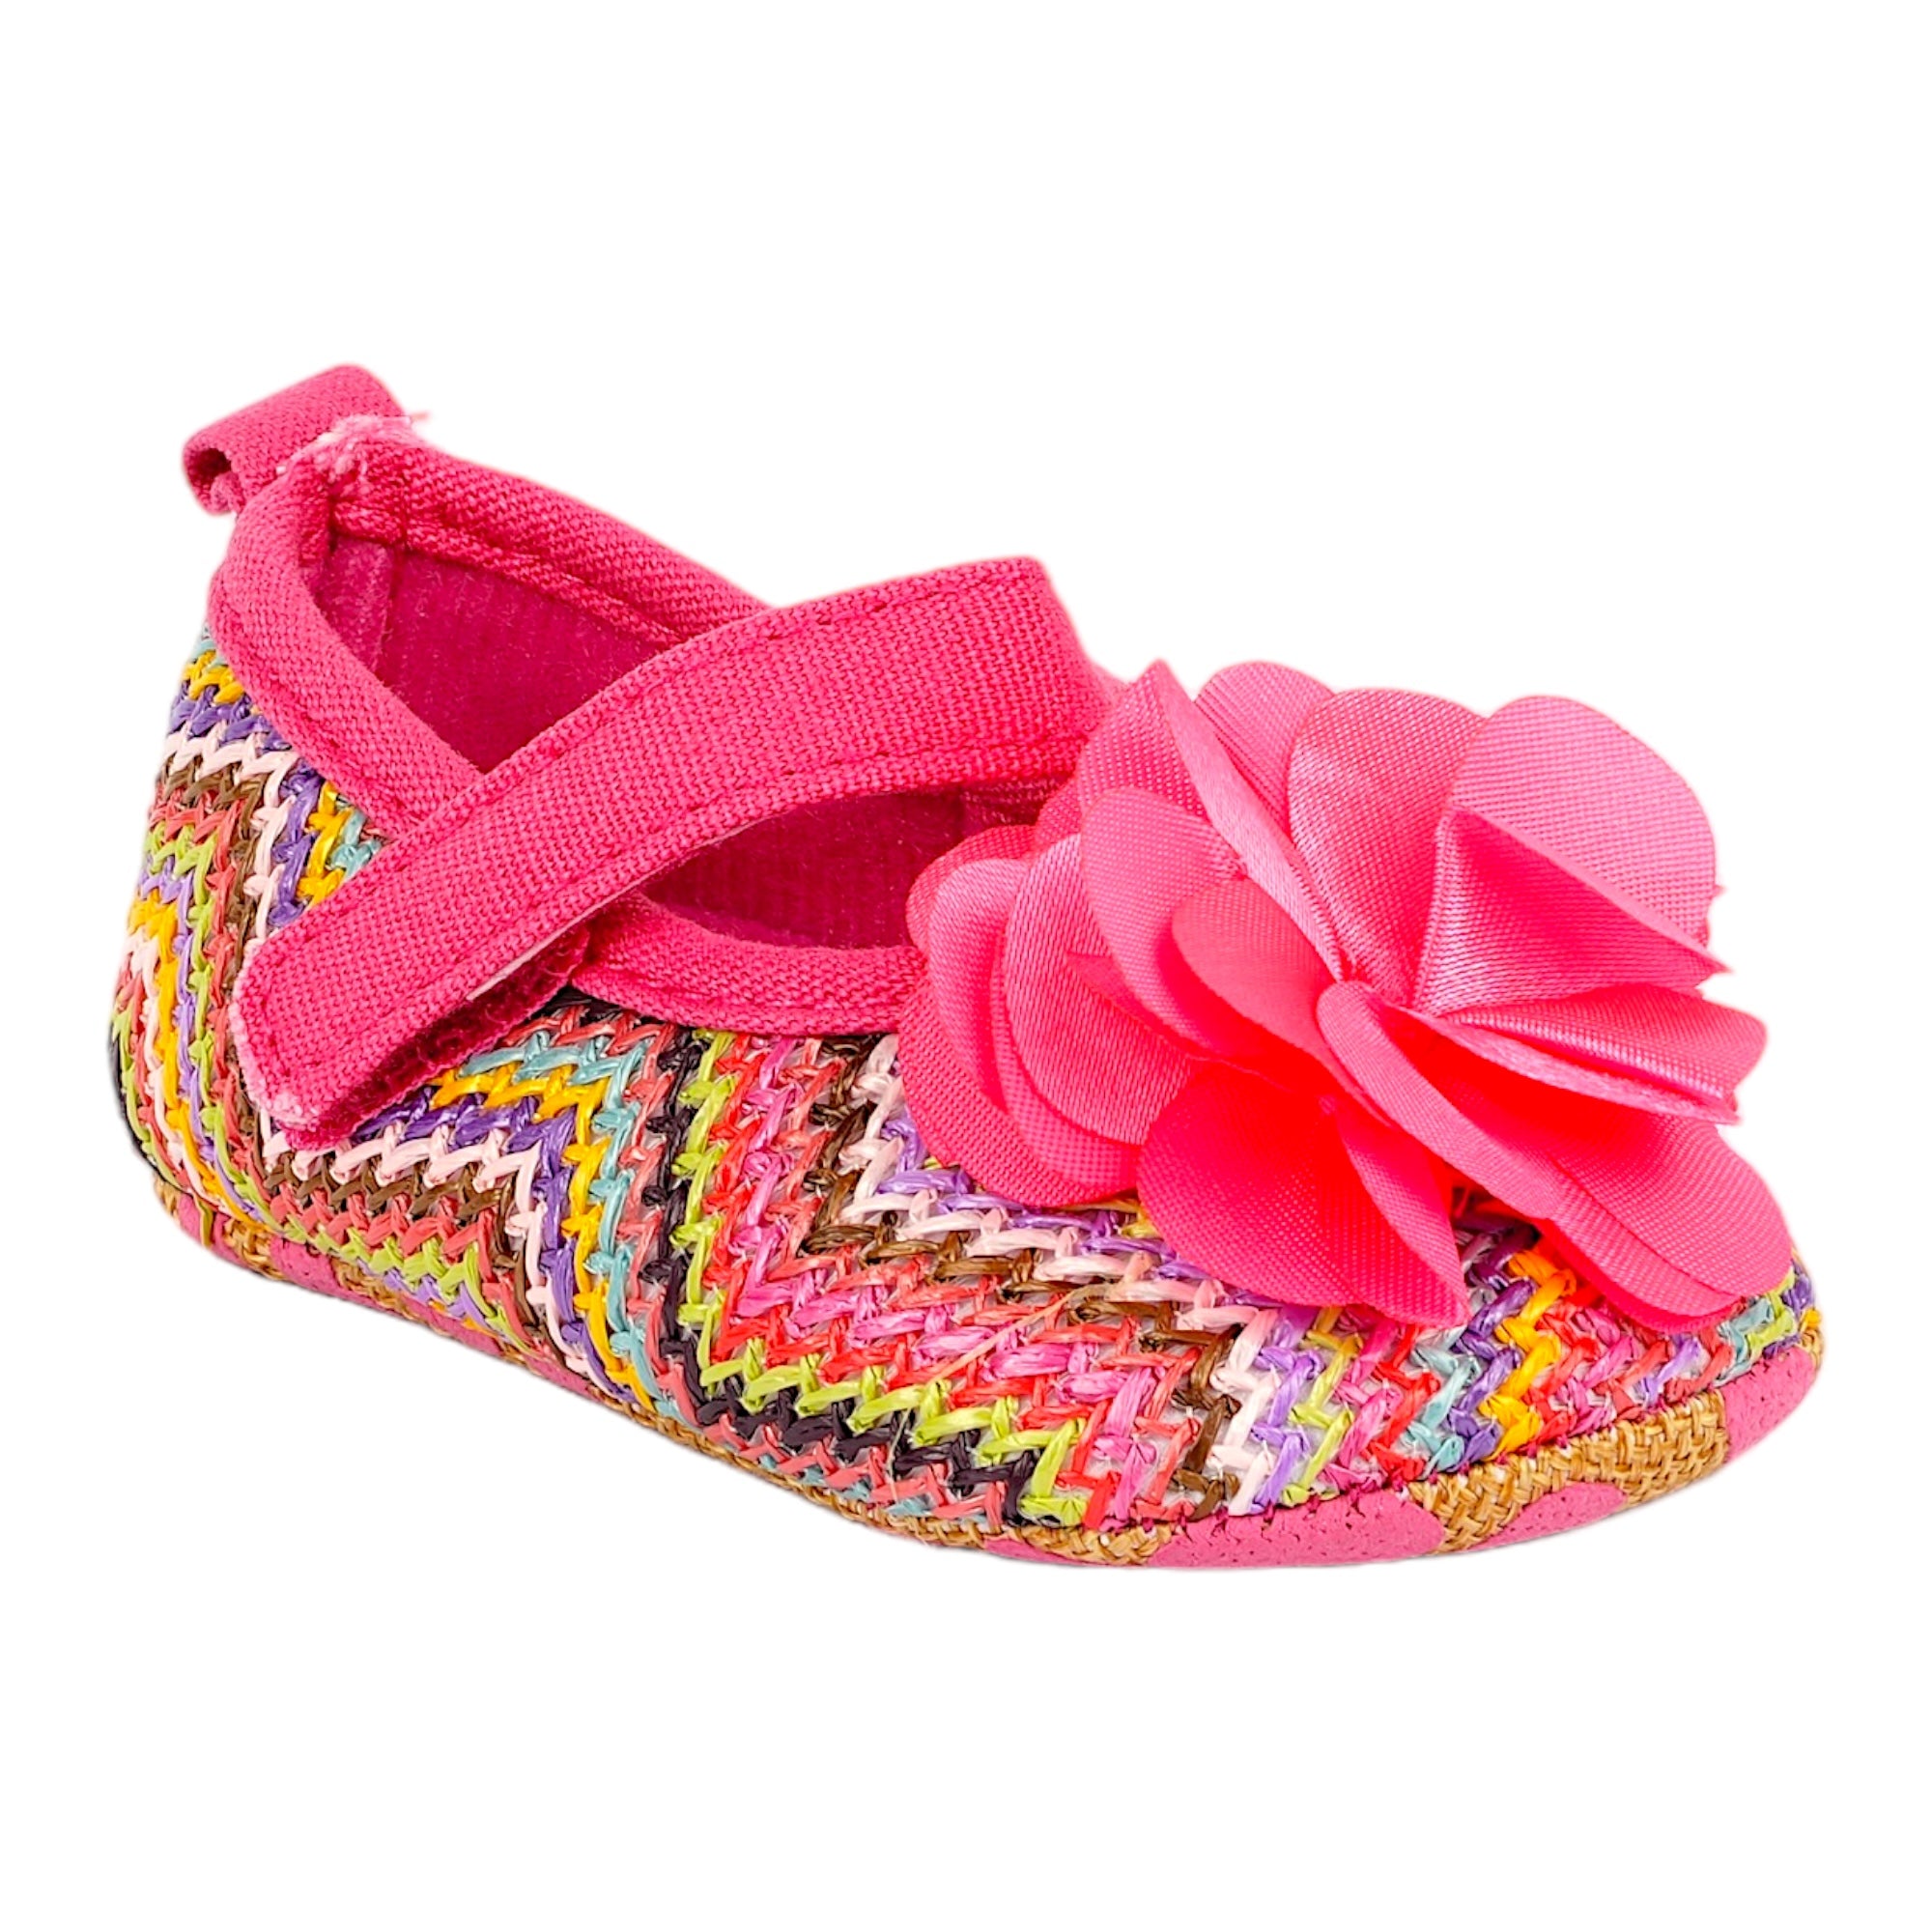 Baby Moo Embellished Flower Colourful Woven Anti-Skid Ballerina Booties - Pink